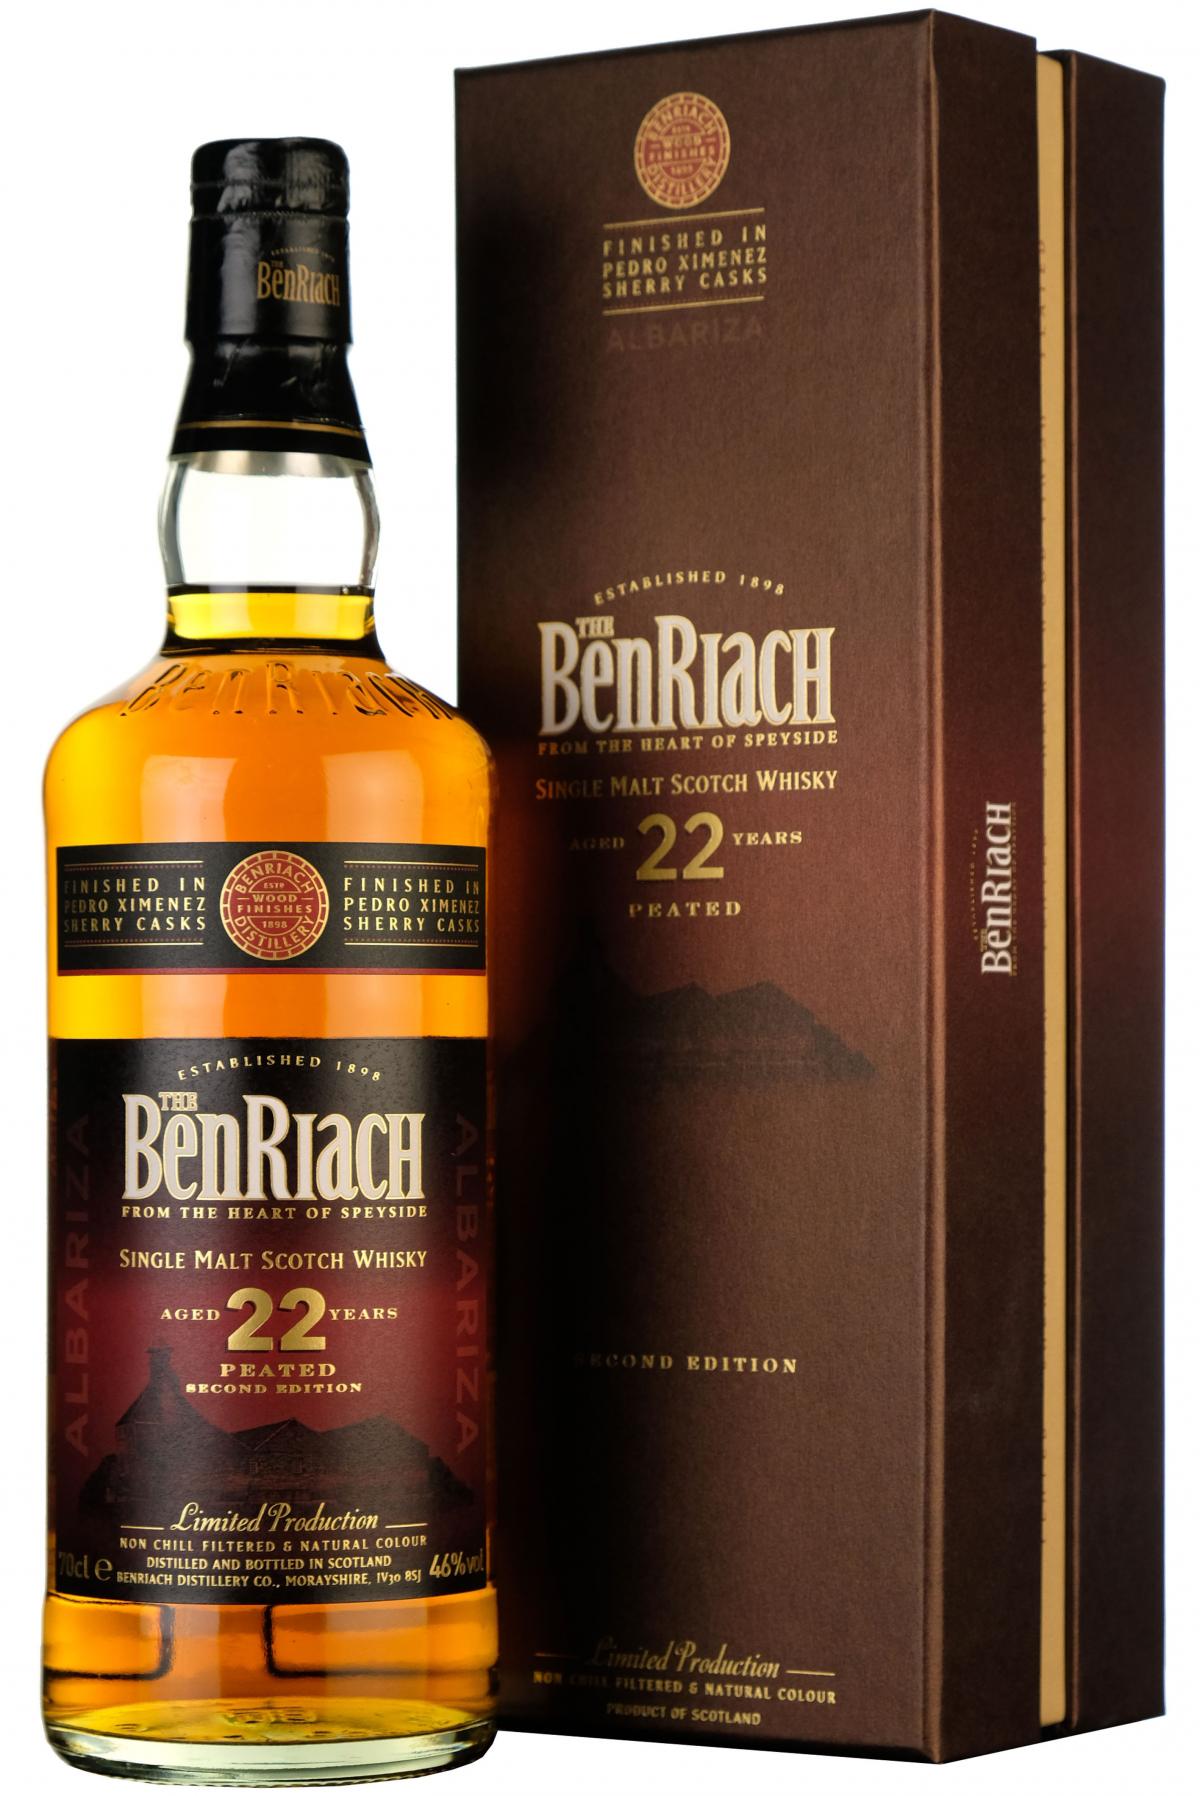 benriach 22 year old, finished in pedro ximenez sherry casks,